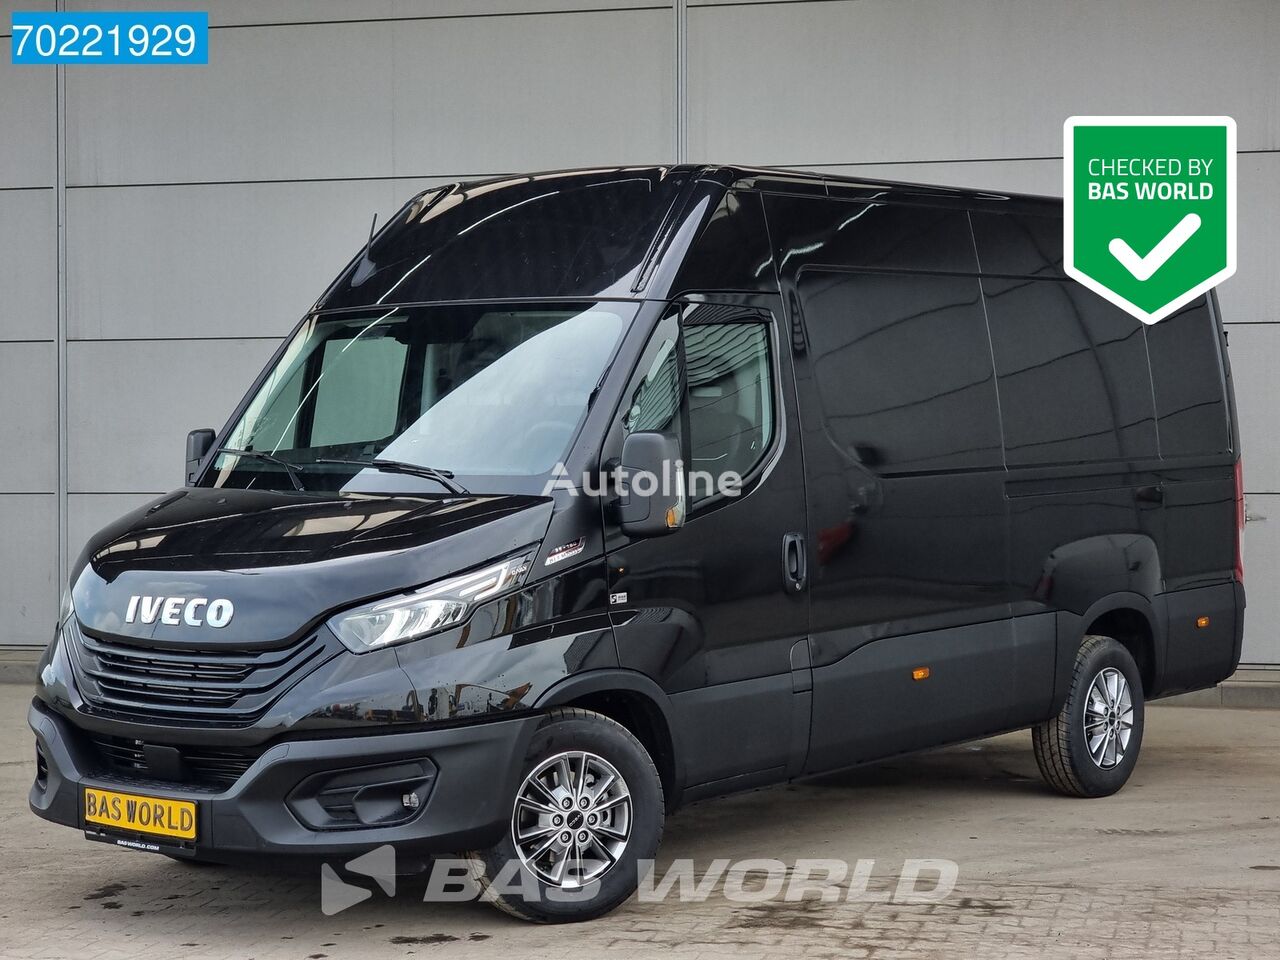 new IVECO Daily 35S18 Automaat L2H2 LED ACC Navi Camera 12m3 Airco car-derived van